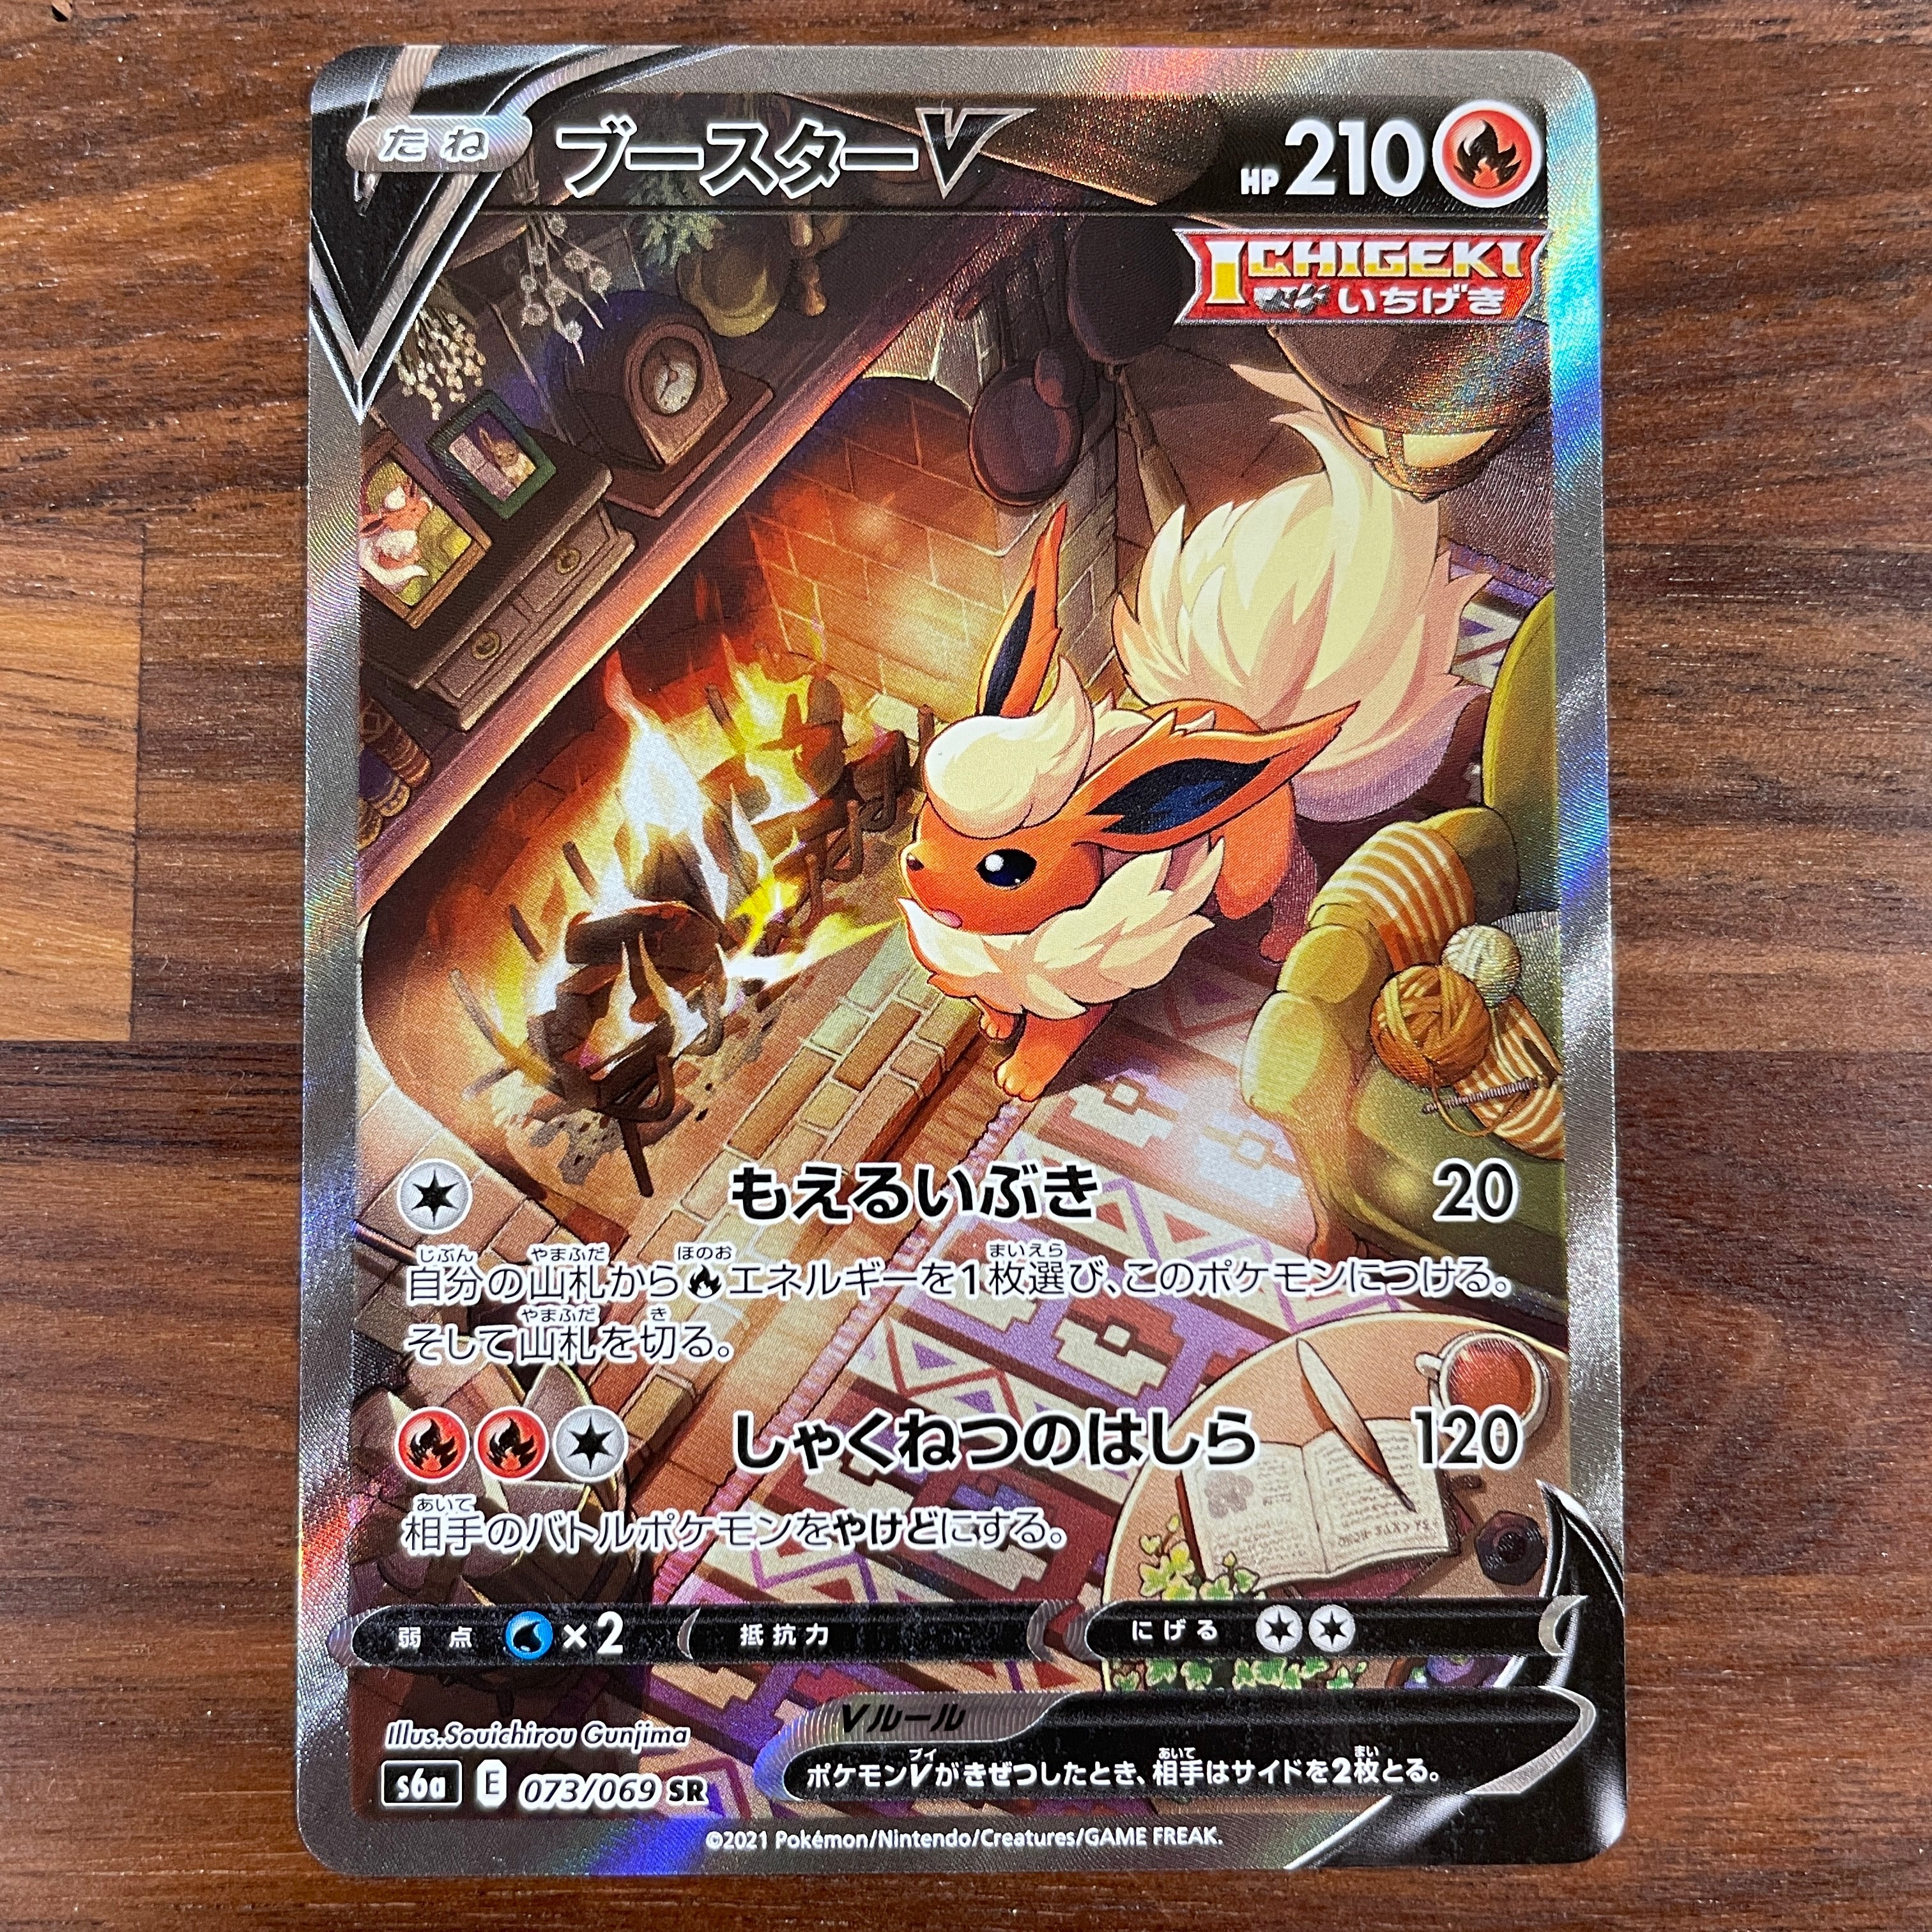 POKÉMON CARD GAME Sword & Shield Expansion pack ｢Eevee Heroes｣  POKÉMON CARD GAME s6a 073/069 Super Rare card  Flareon V